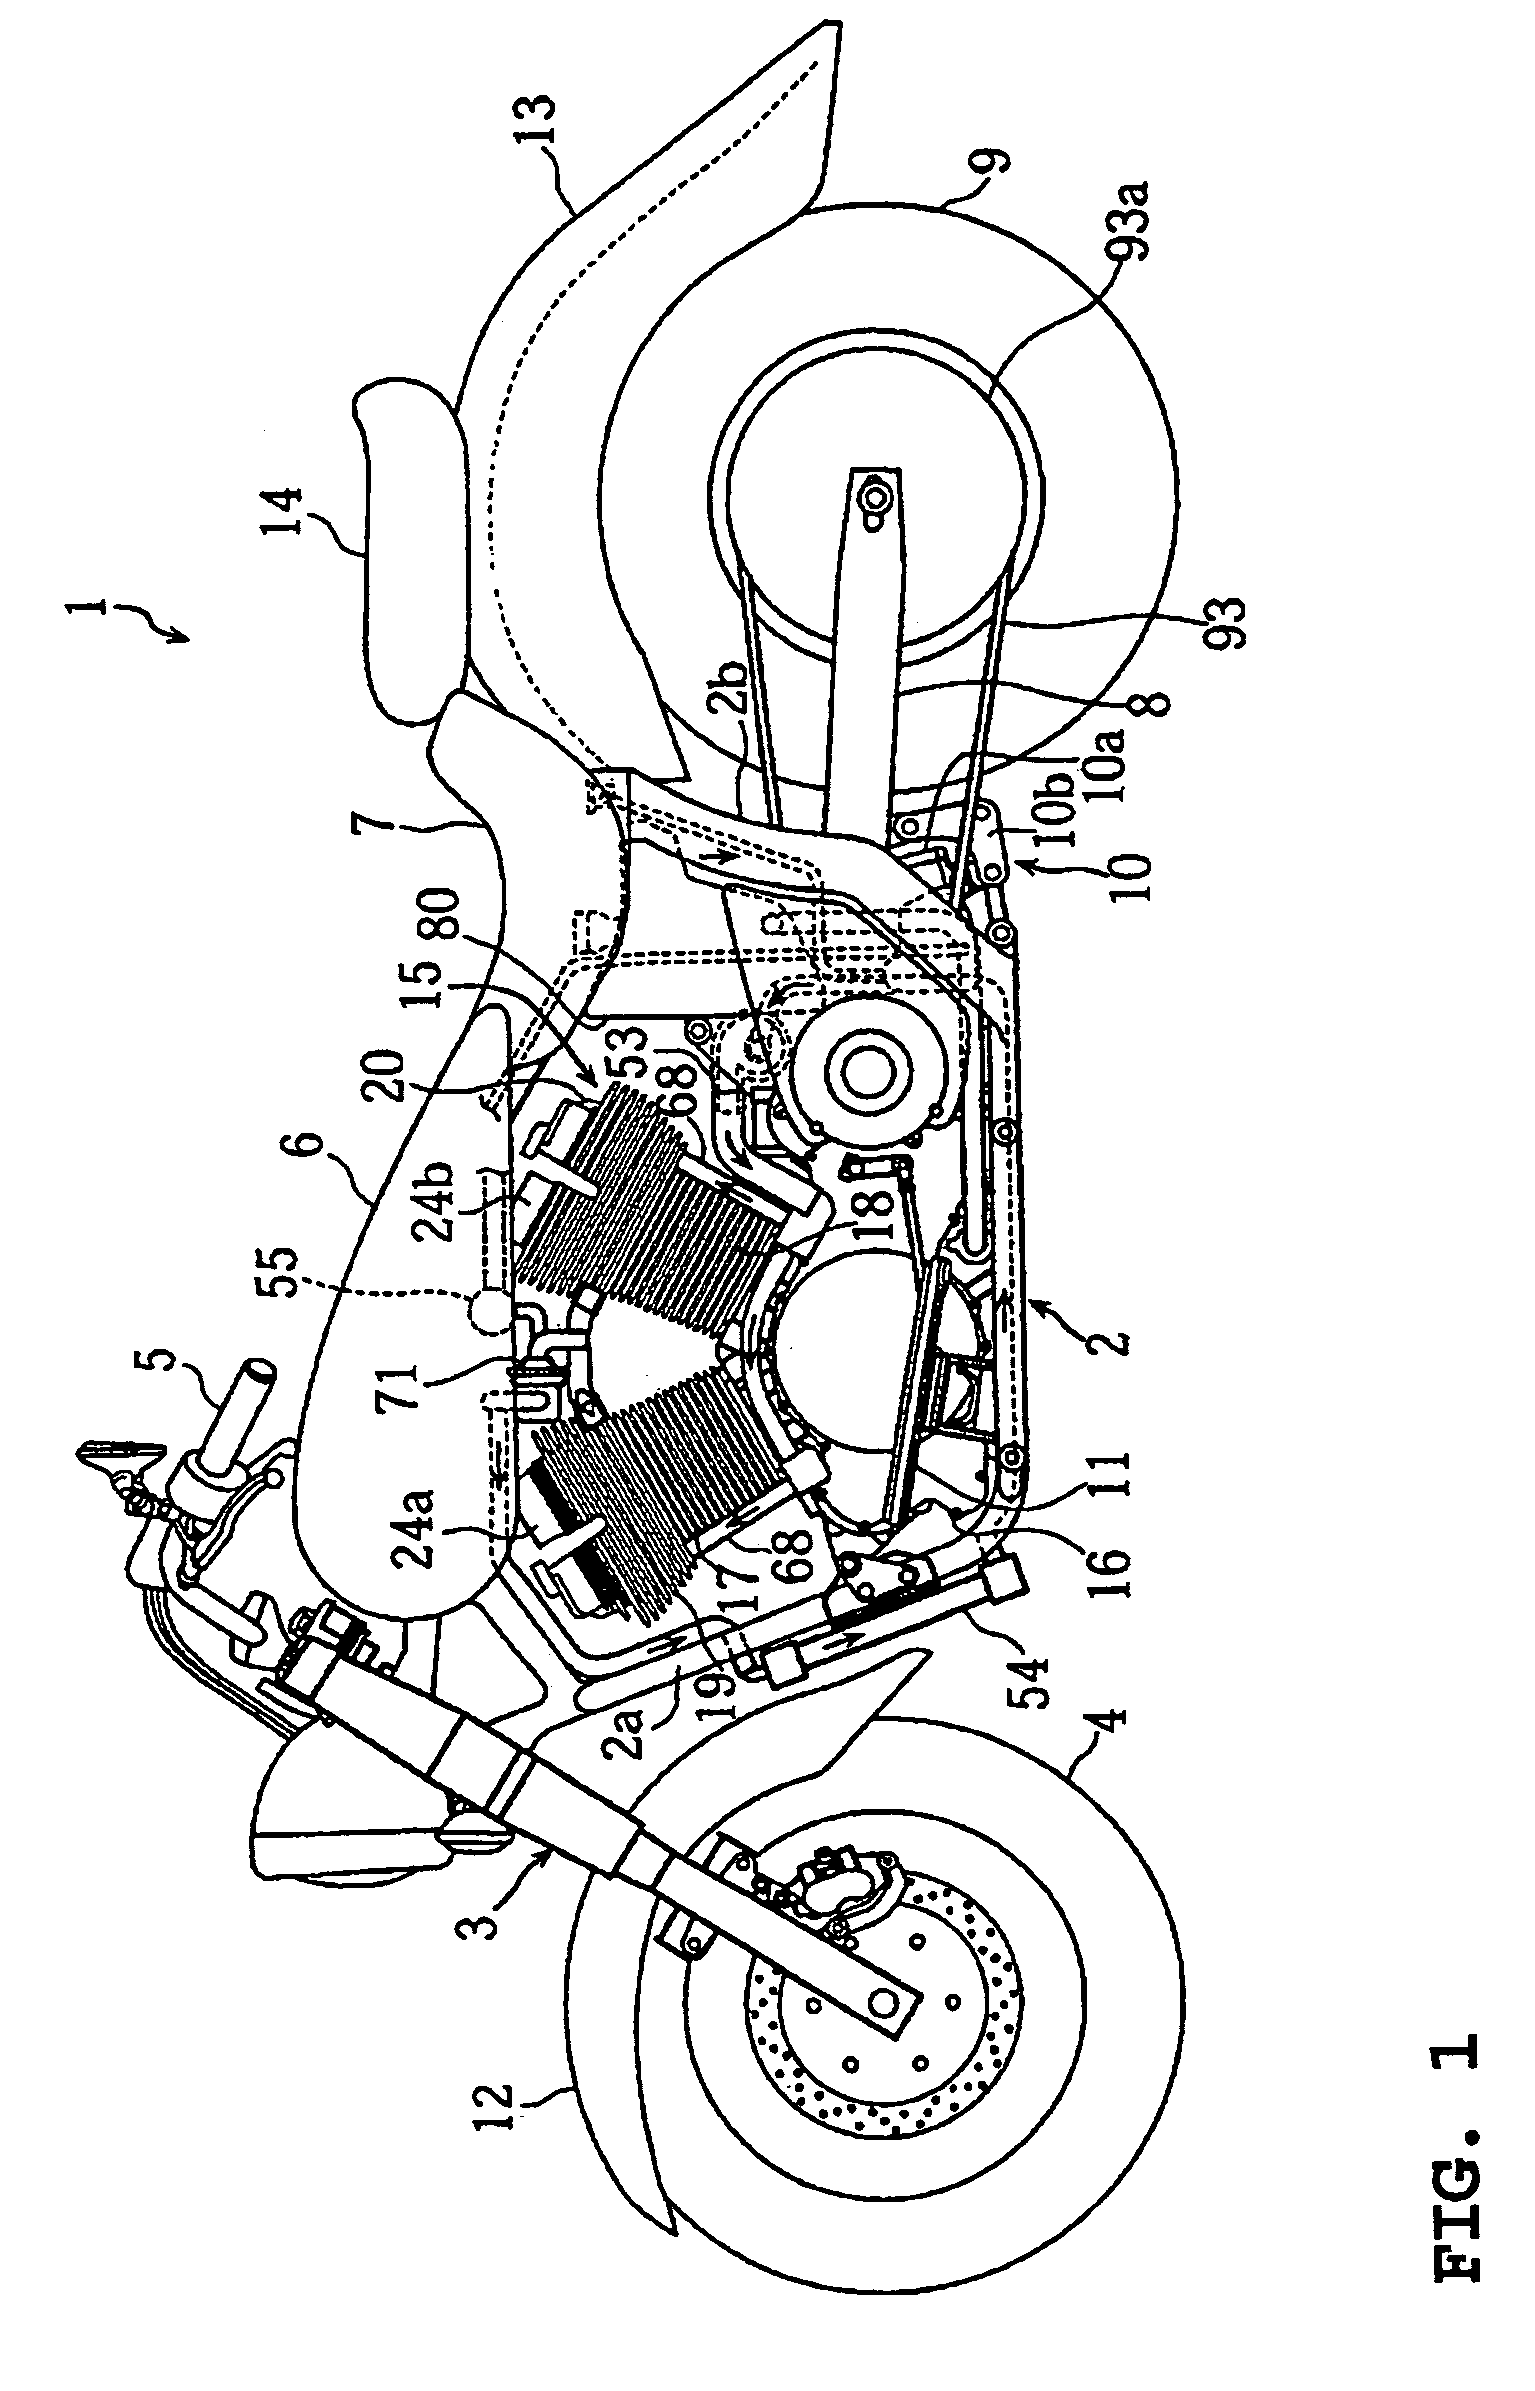 Lubrication system for an engine